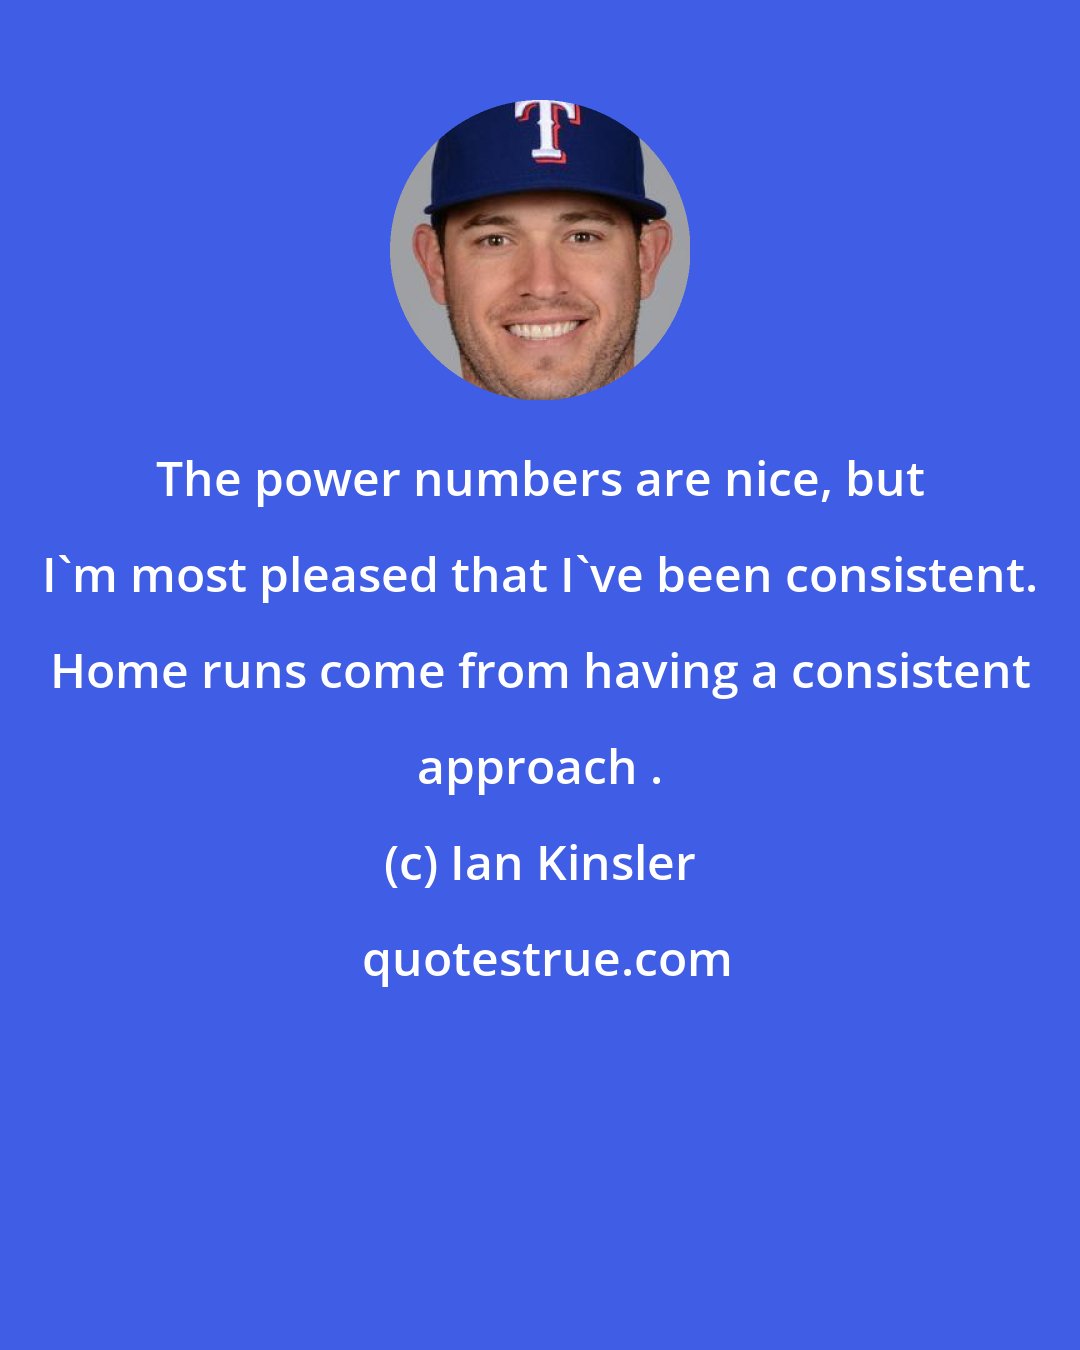 Ian Kinsler: The power numbers are nice, but I'm most pleased that I've been consistent. Home runs come from having a consistent approach .